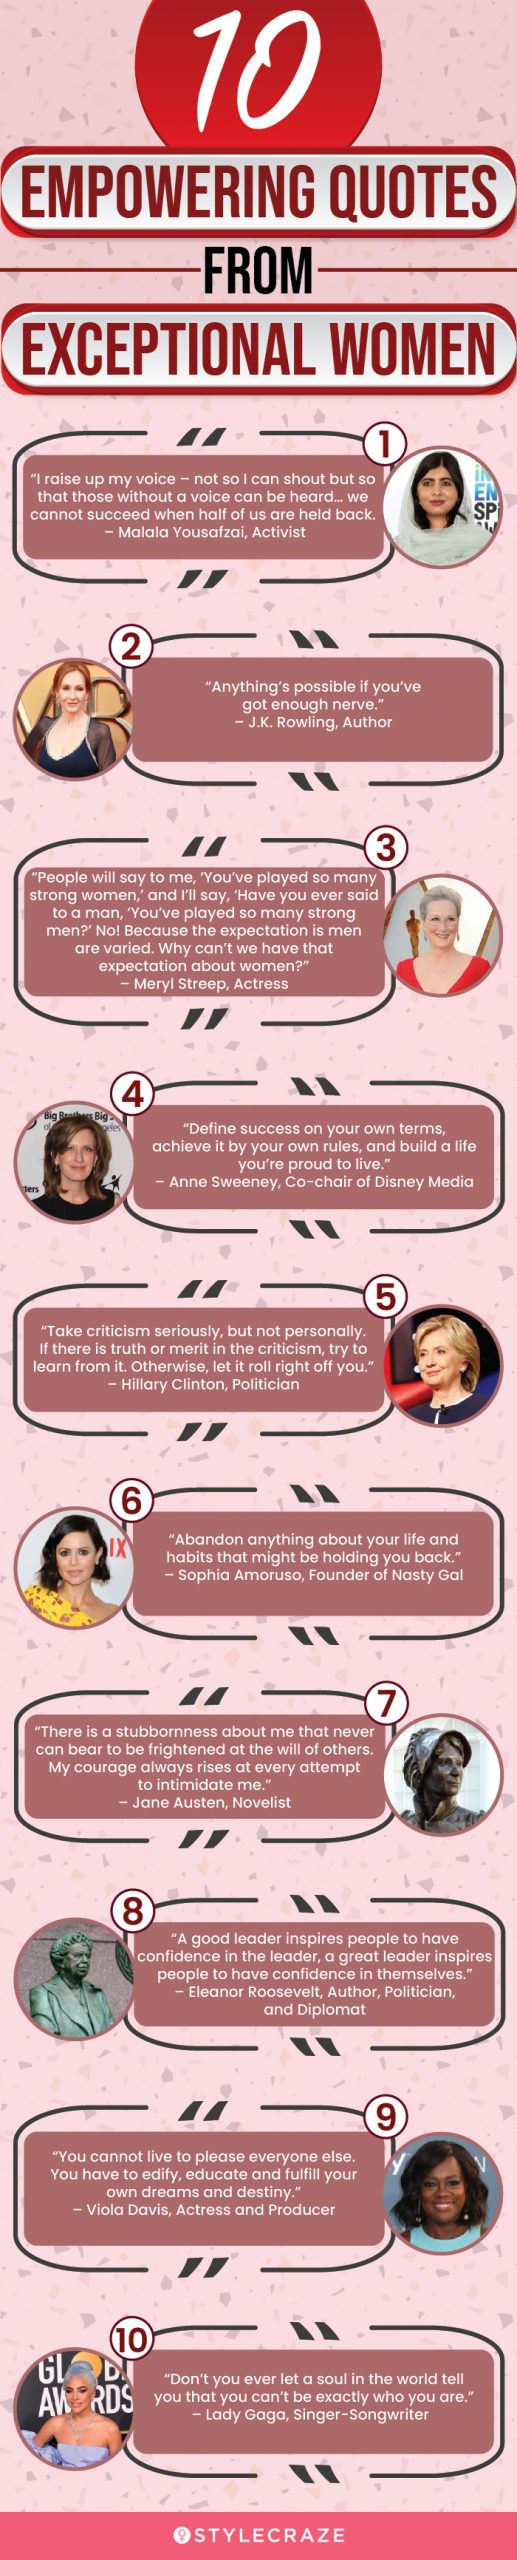 10 empowering quotes from exceptional women (infographic)